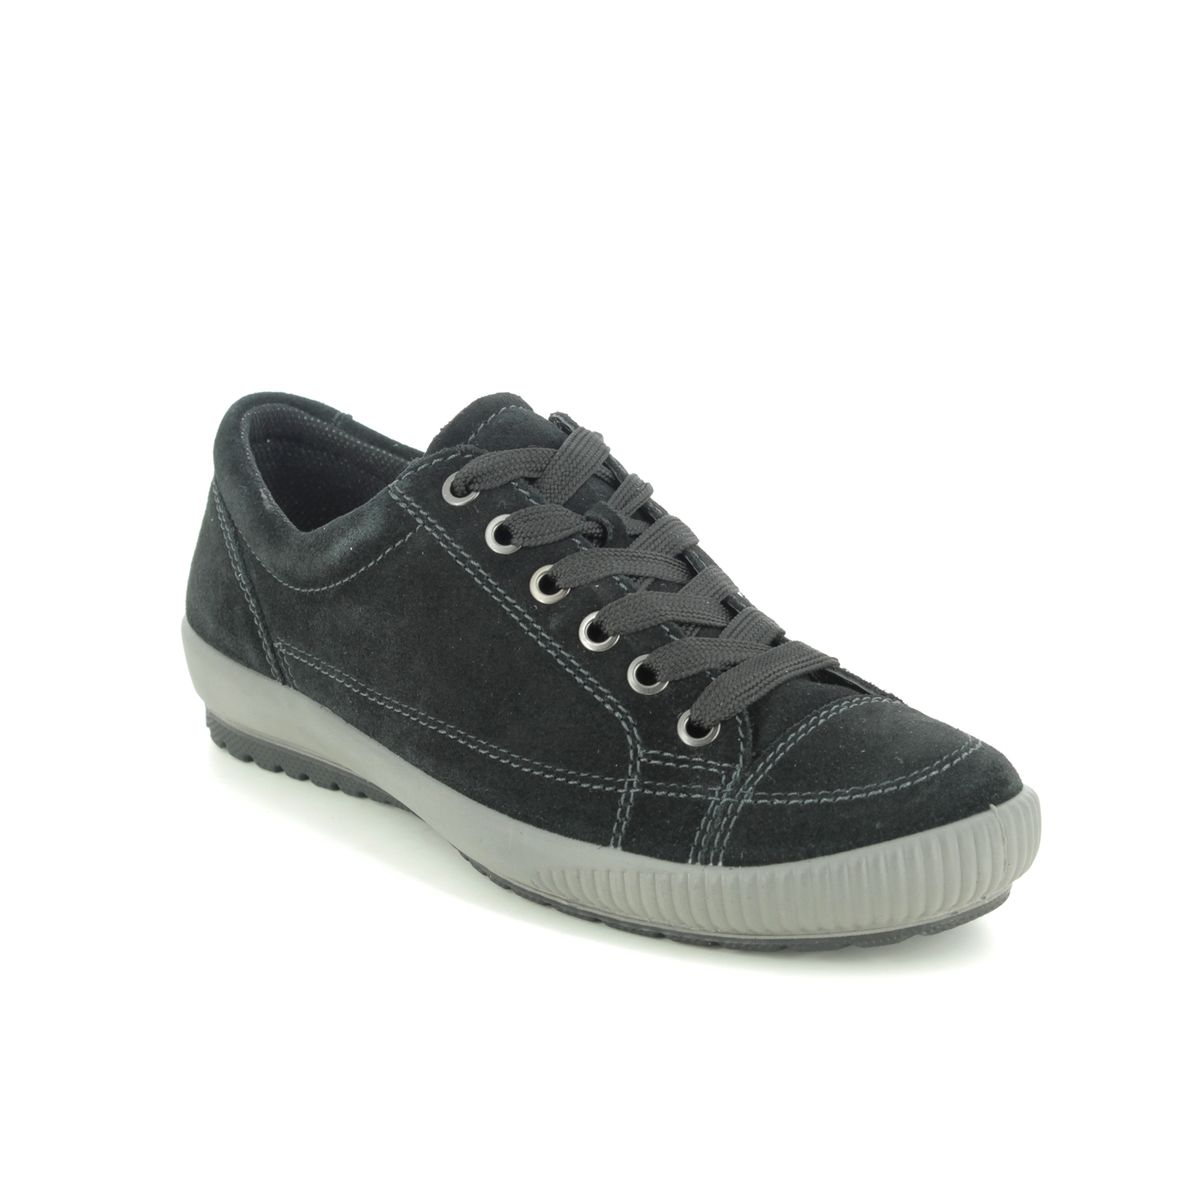 Legero Tanaro Stitch Black Suede Womens Lacing Shoes 0800820-0000 In Size 6 In Plain Black Suede